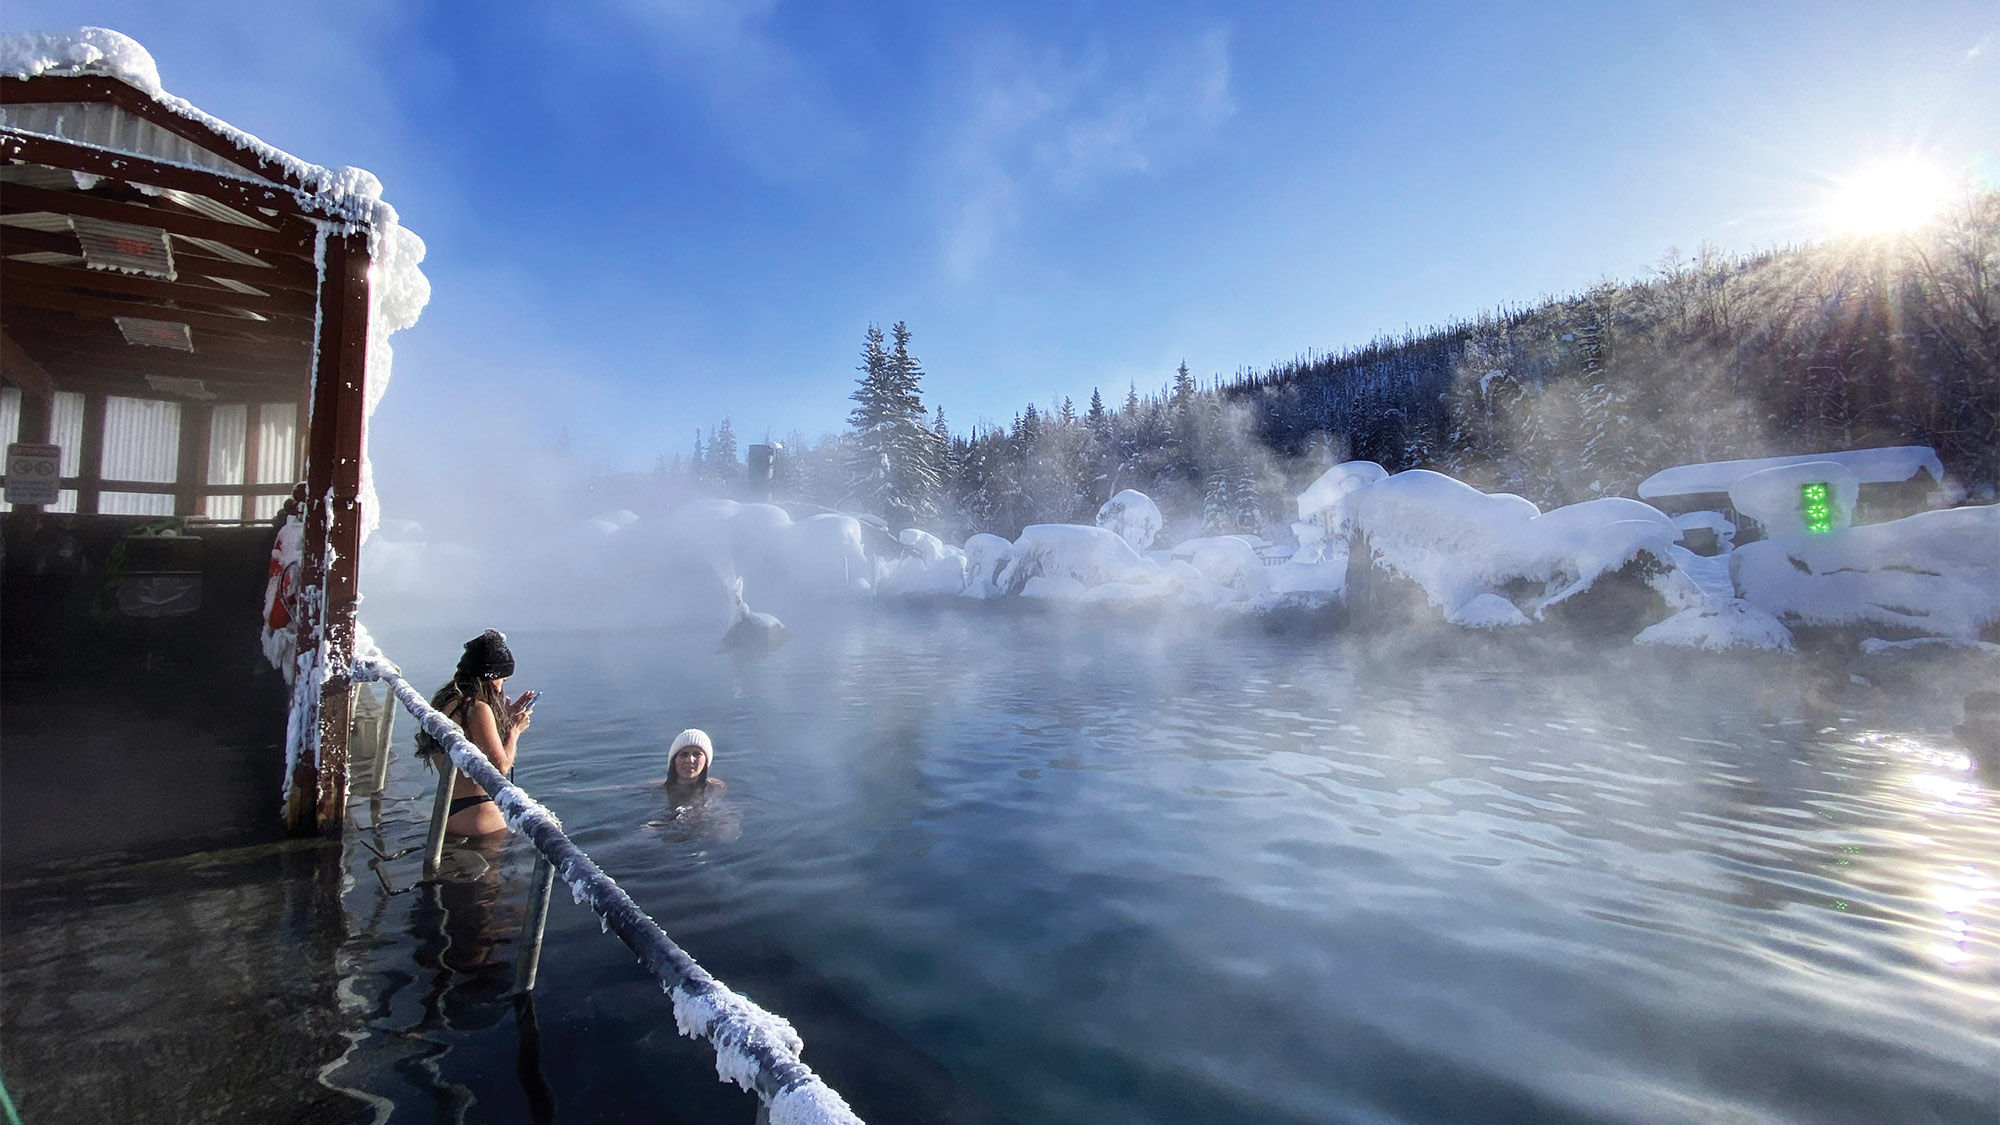 Chena Hot Springs, about 60 miles from Fairbanks, provides a hot outdoor mineral water plunge in a beautiful setting, even on sub-zero days. Just be ready for icicles to form in your wet hair.